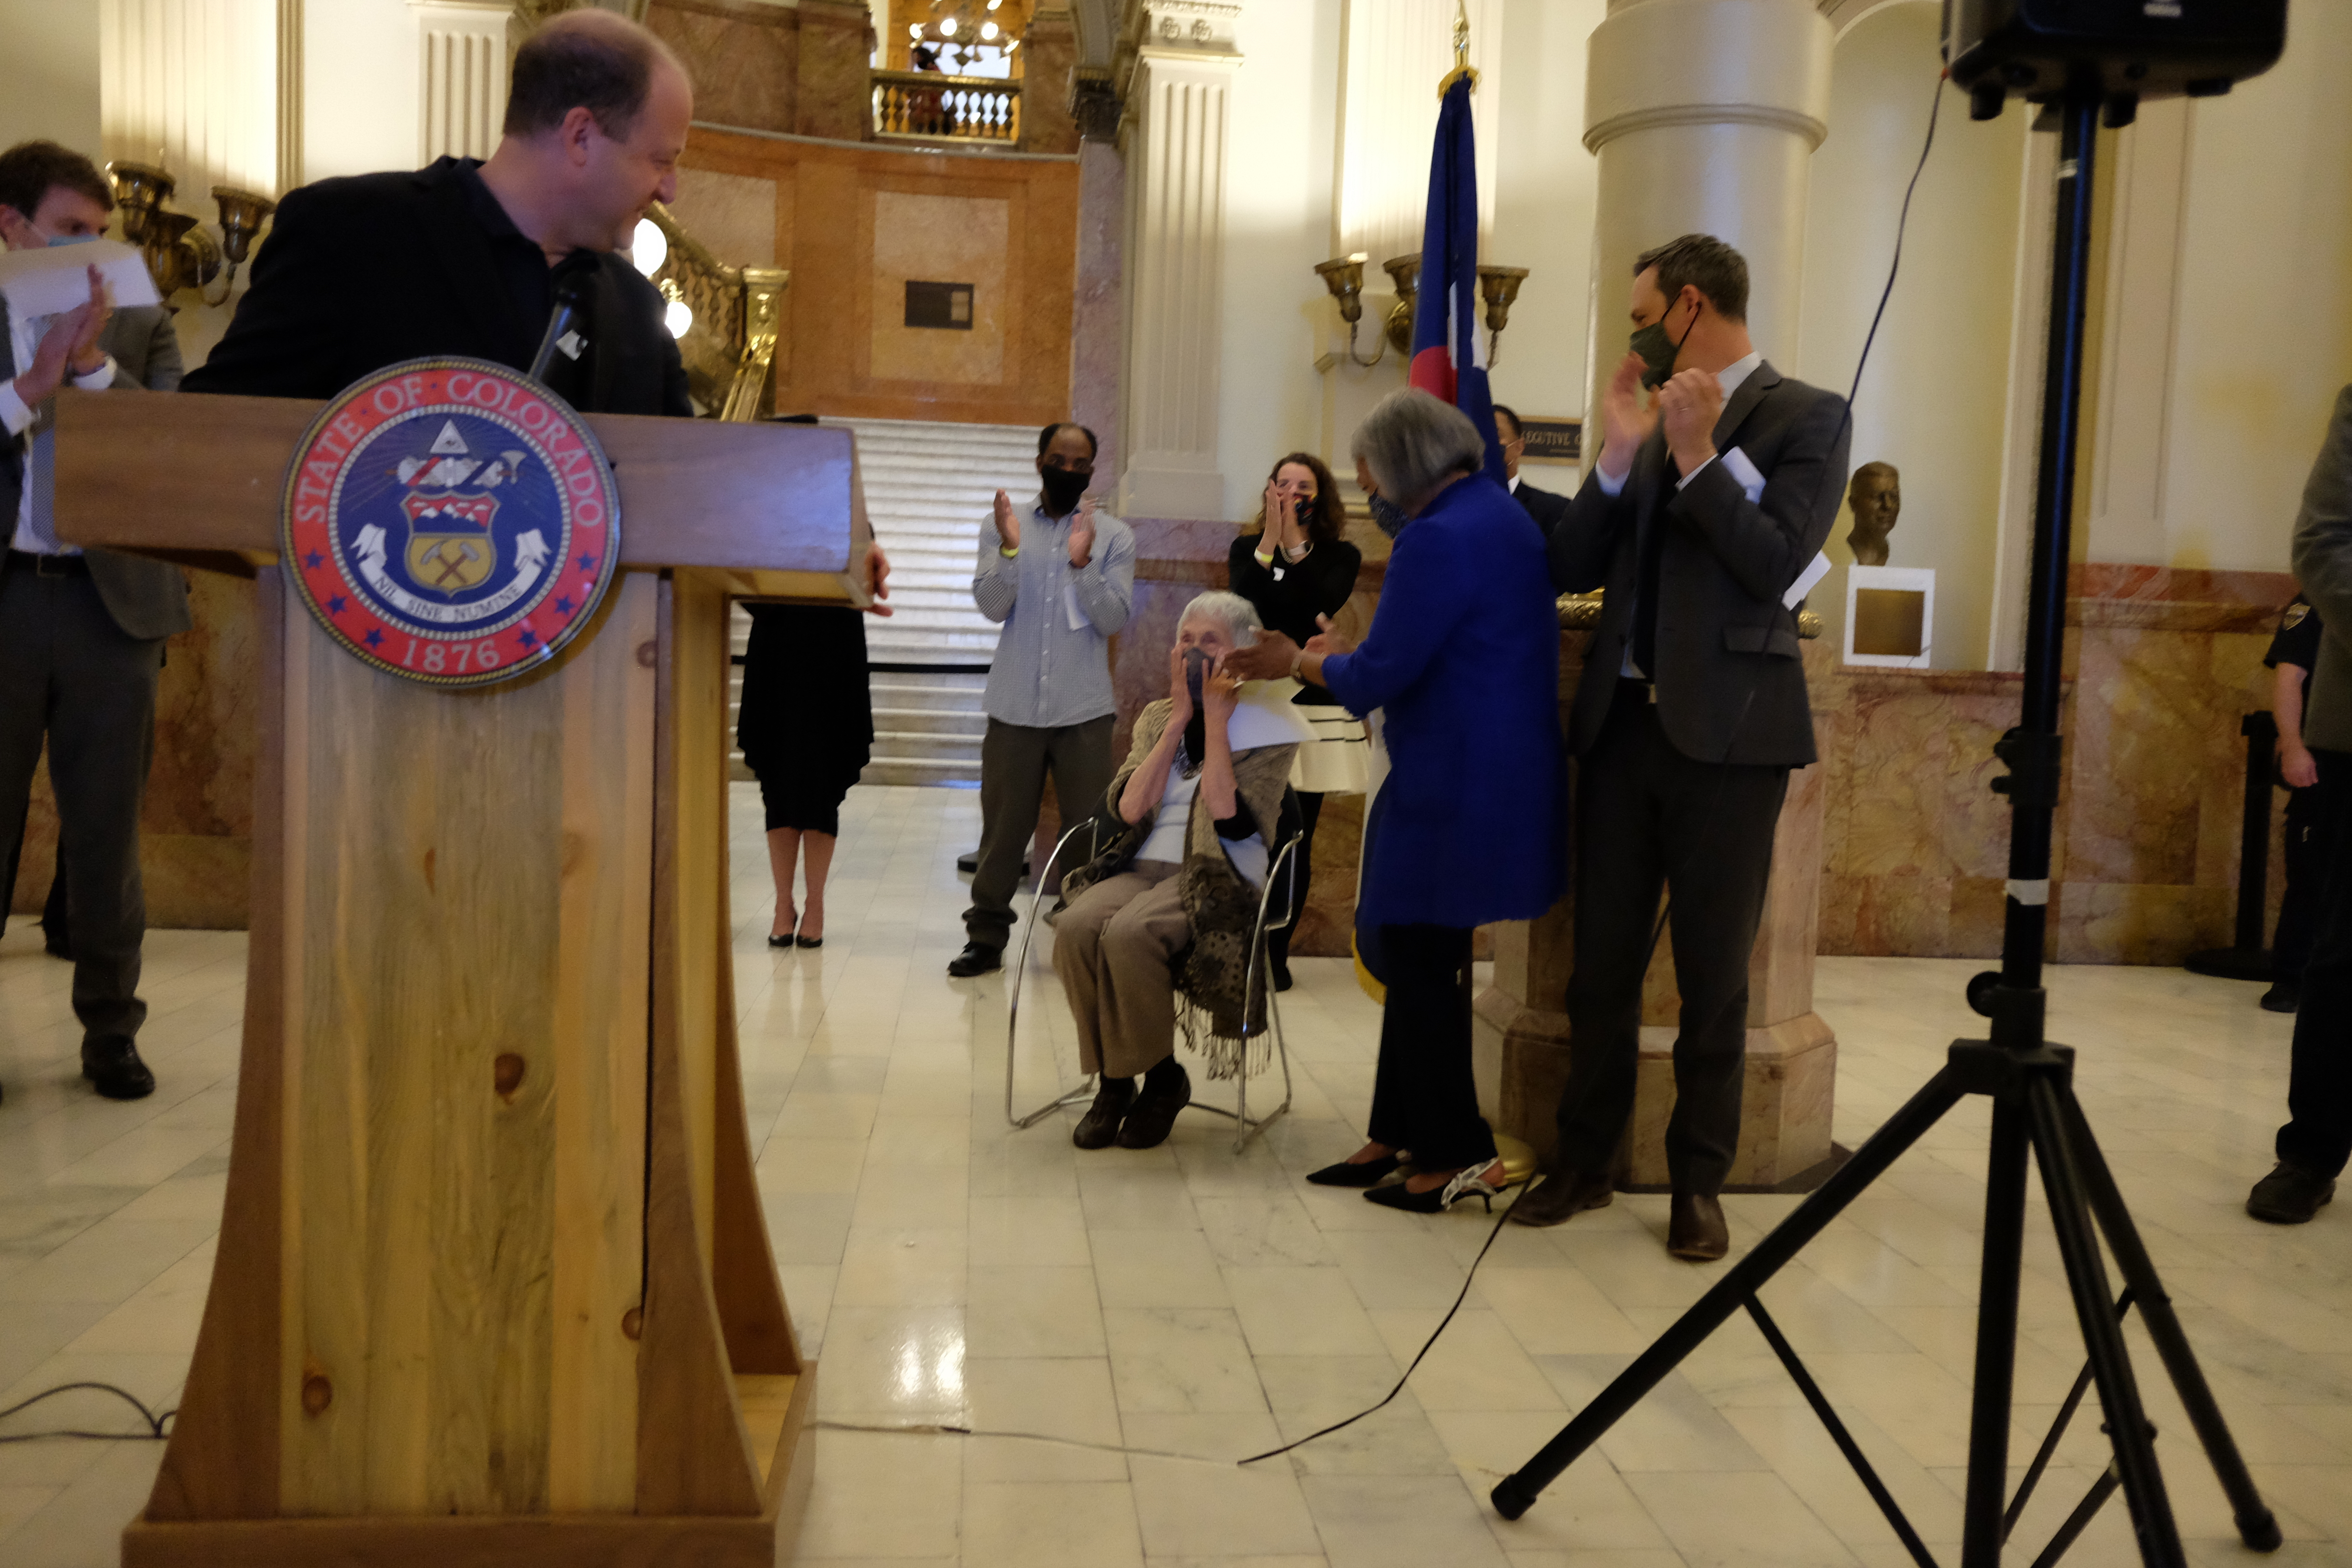 Gov. Jared Polis stands at a podium and turns to look at early childhood advocate Anna Jo Haynes, seated. She clasps her hands to her face in surprise. Lawmakers standing nearby applaud.